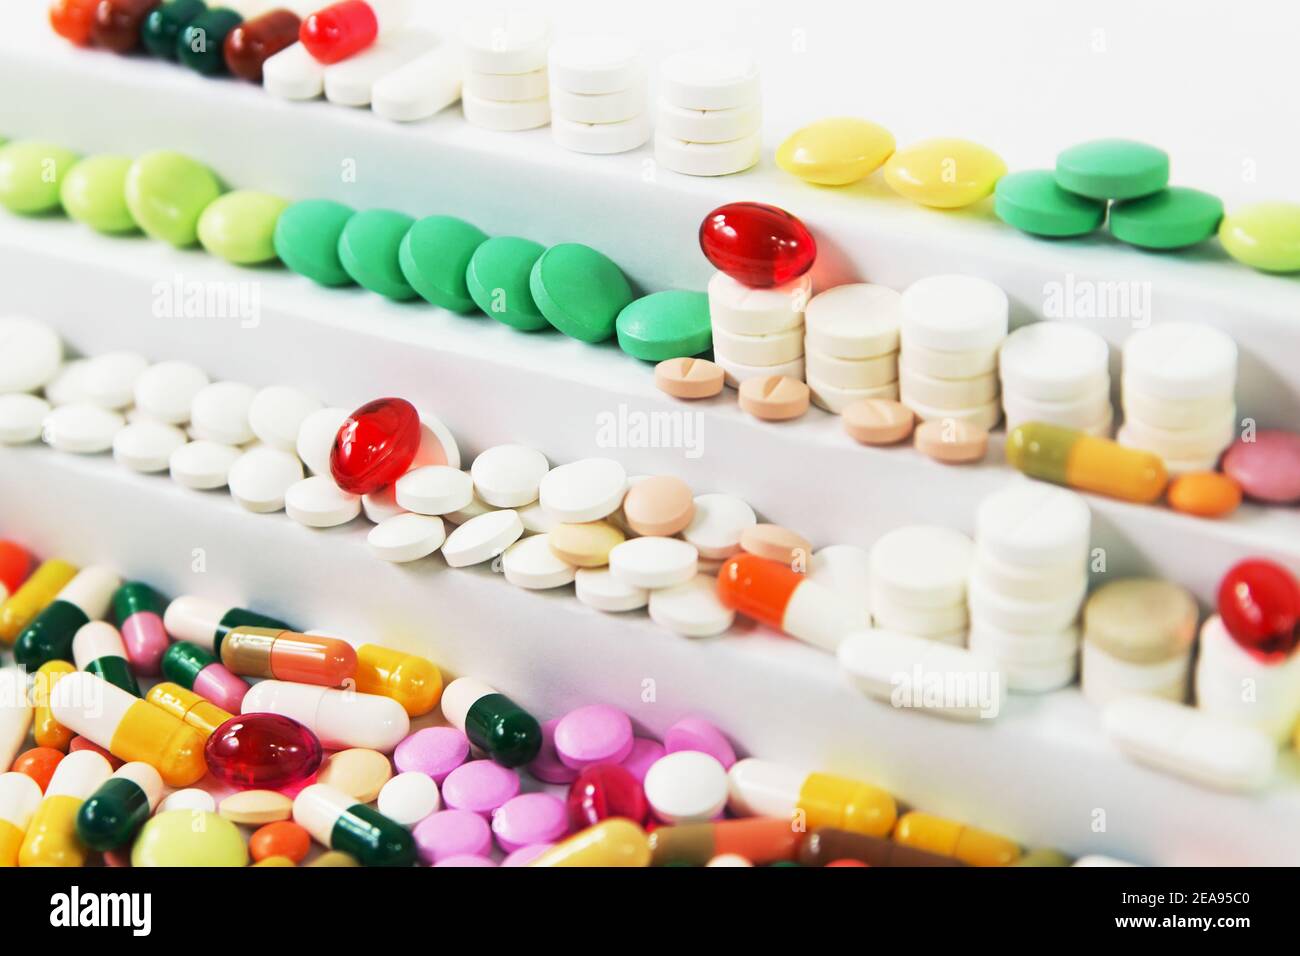 Many various medical pills in rows on stairs Stock Photo